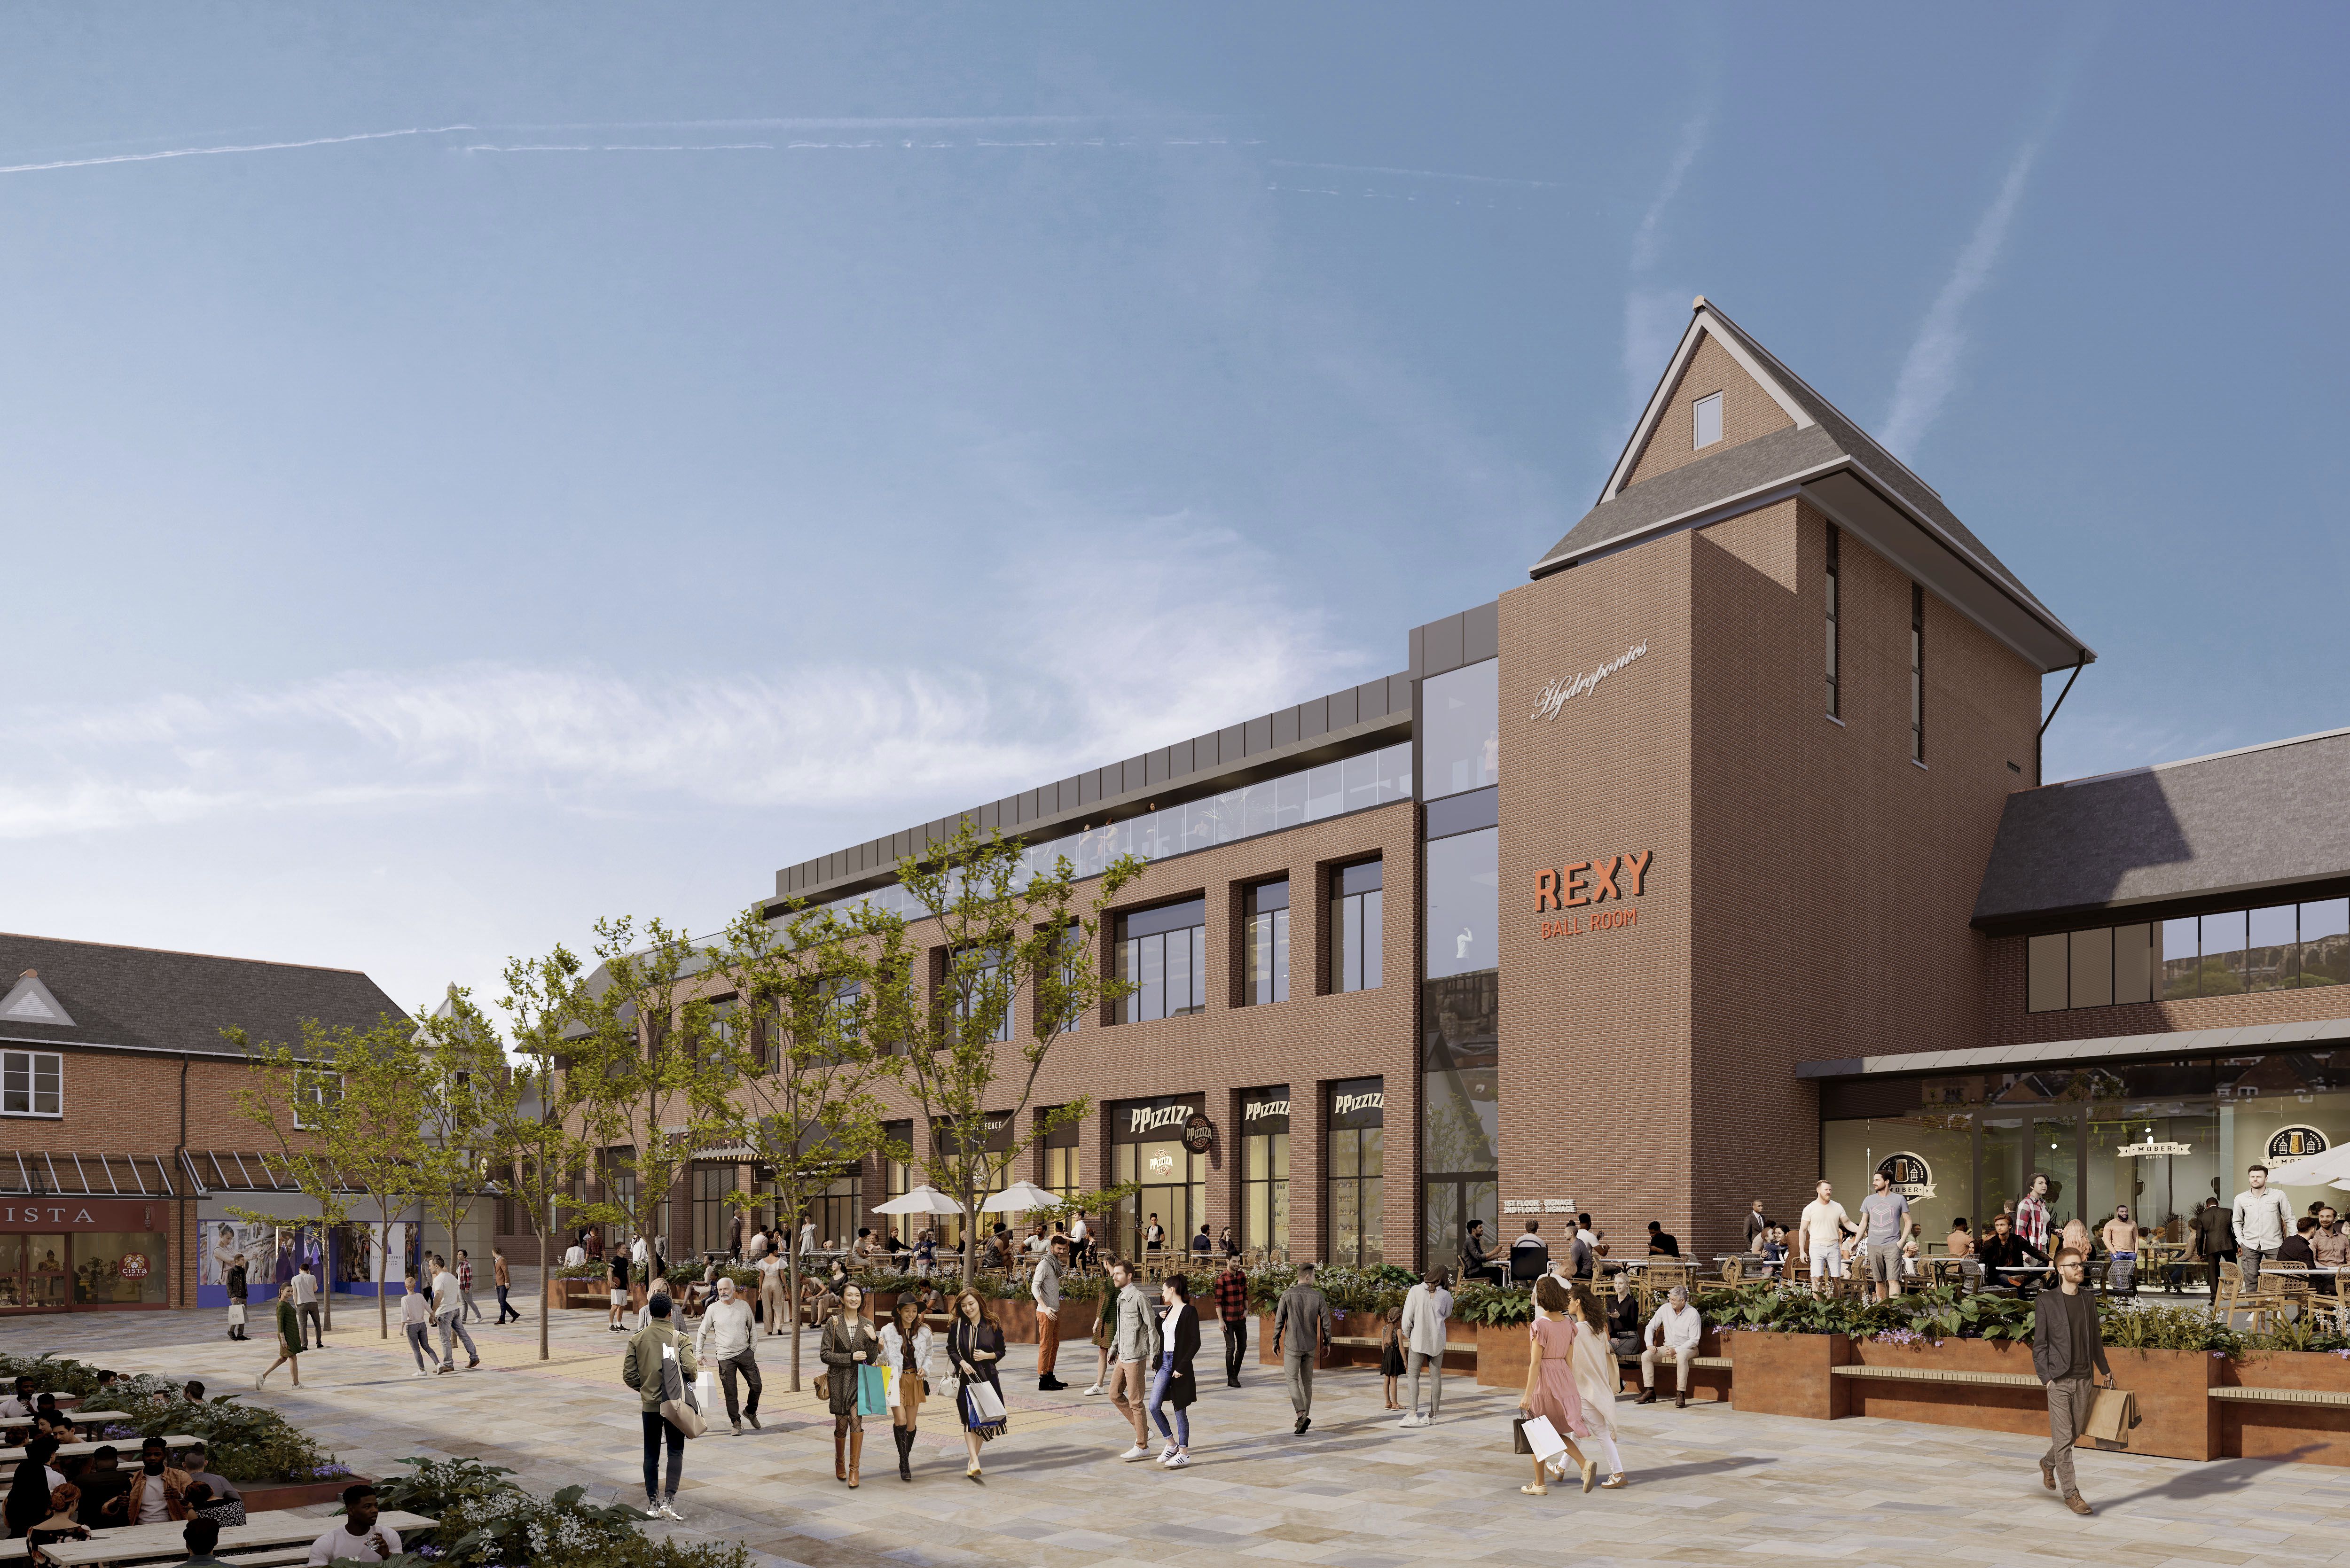 A picture of an artist's impression of how the cinema plaza will look.